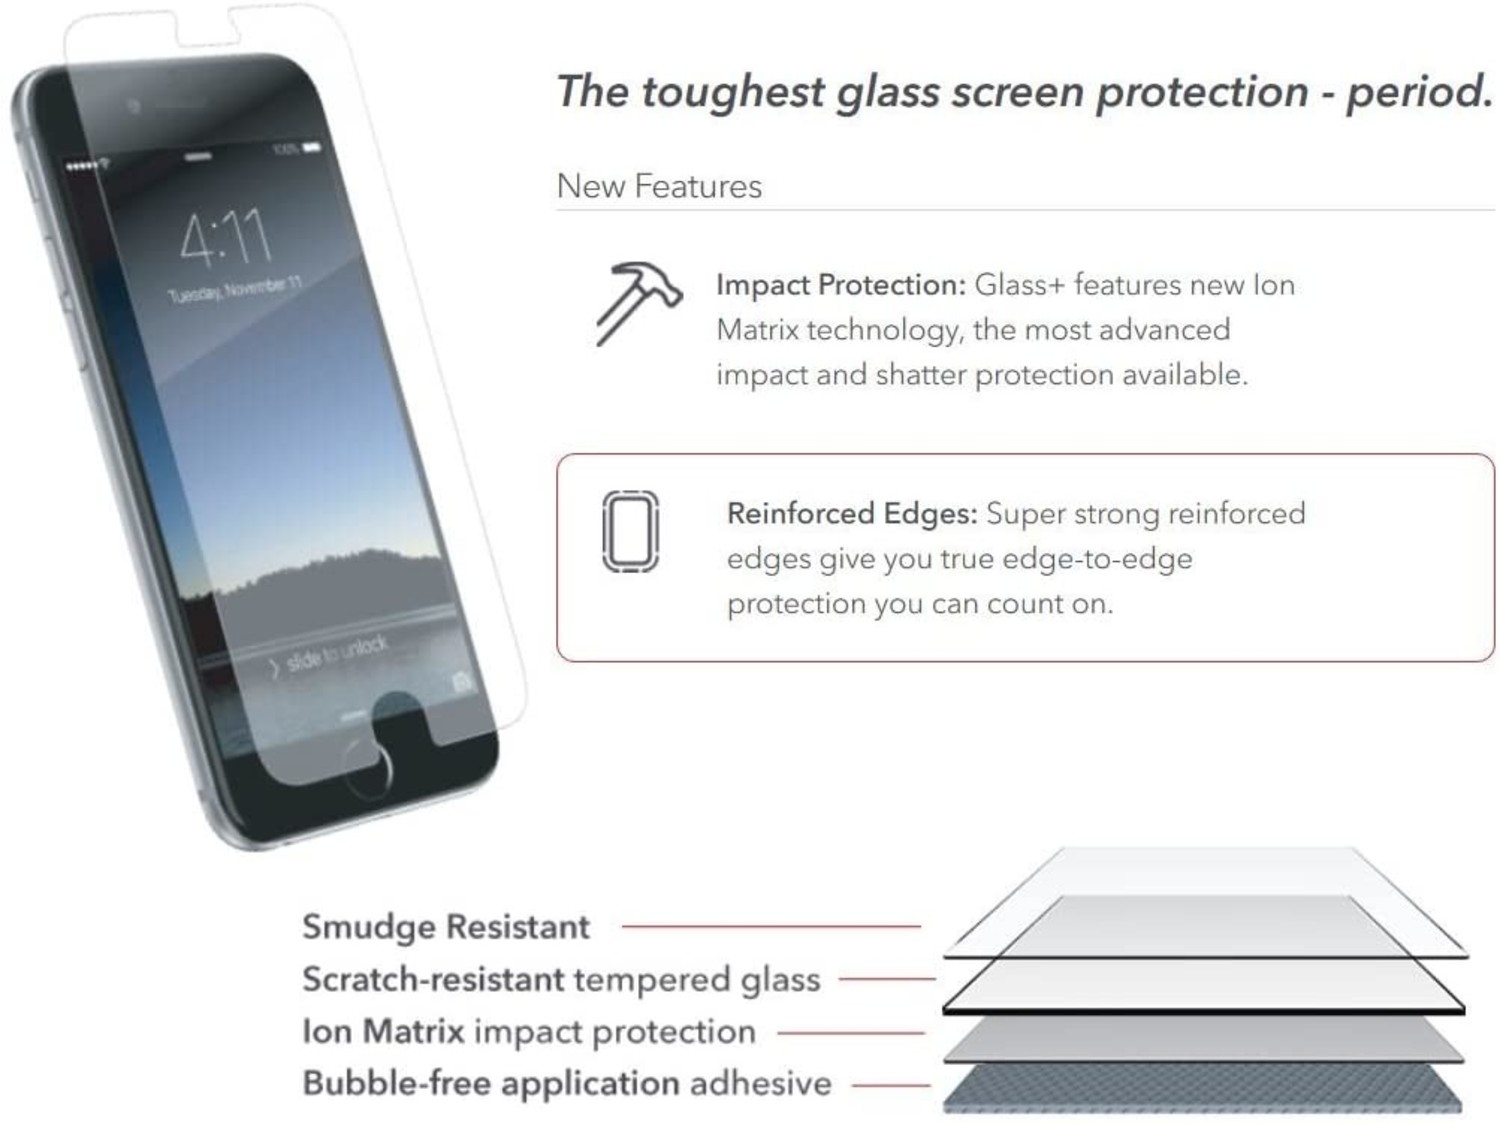 invisibleSHIELD Glass+ Screen Protector Crystal Clear,InvisibleShield Glass  Plus for Apple iPhone 6/6s/7/8 - kite+key, Rutgers Tech Store